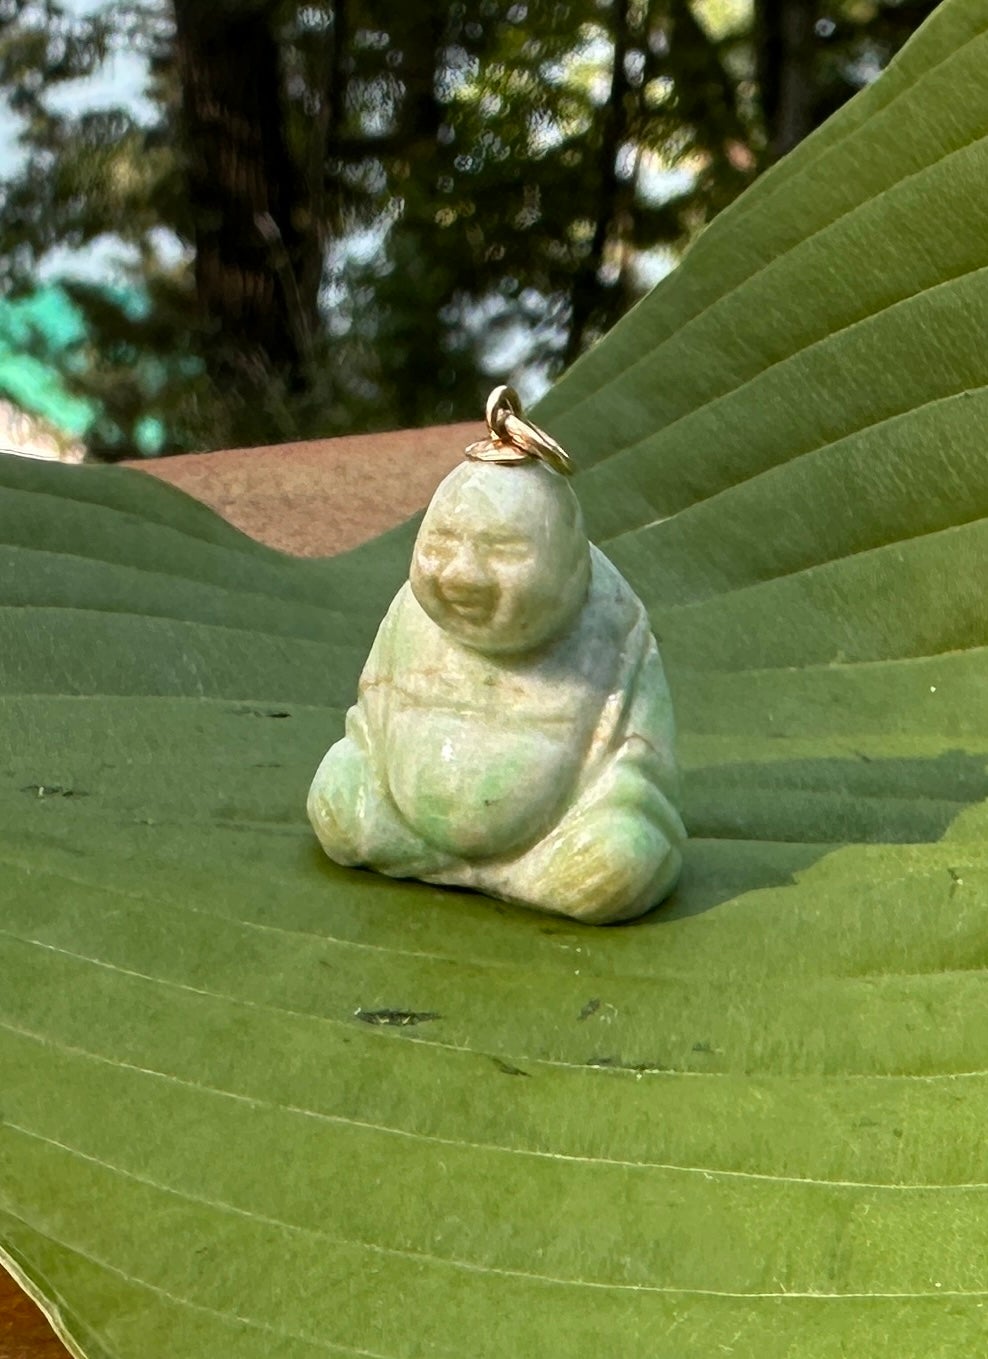 This is a wonderful antique Art Deco Jade Smiling Fat Buddha Pendant in 14 Karat Gold.  The Buddha is exquisitely carved in natural Jade.  The Buddha with his radiant smile and Fat Buddha Belly is also known as the Buddha of Happiness, and the